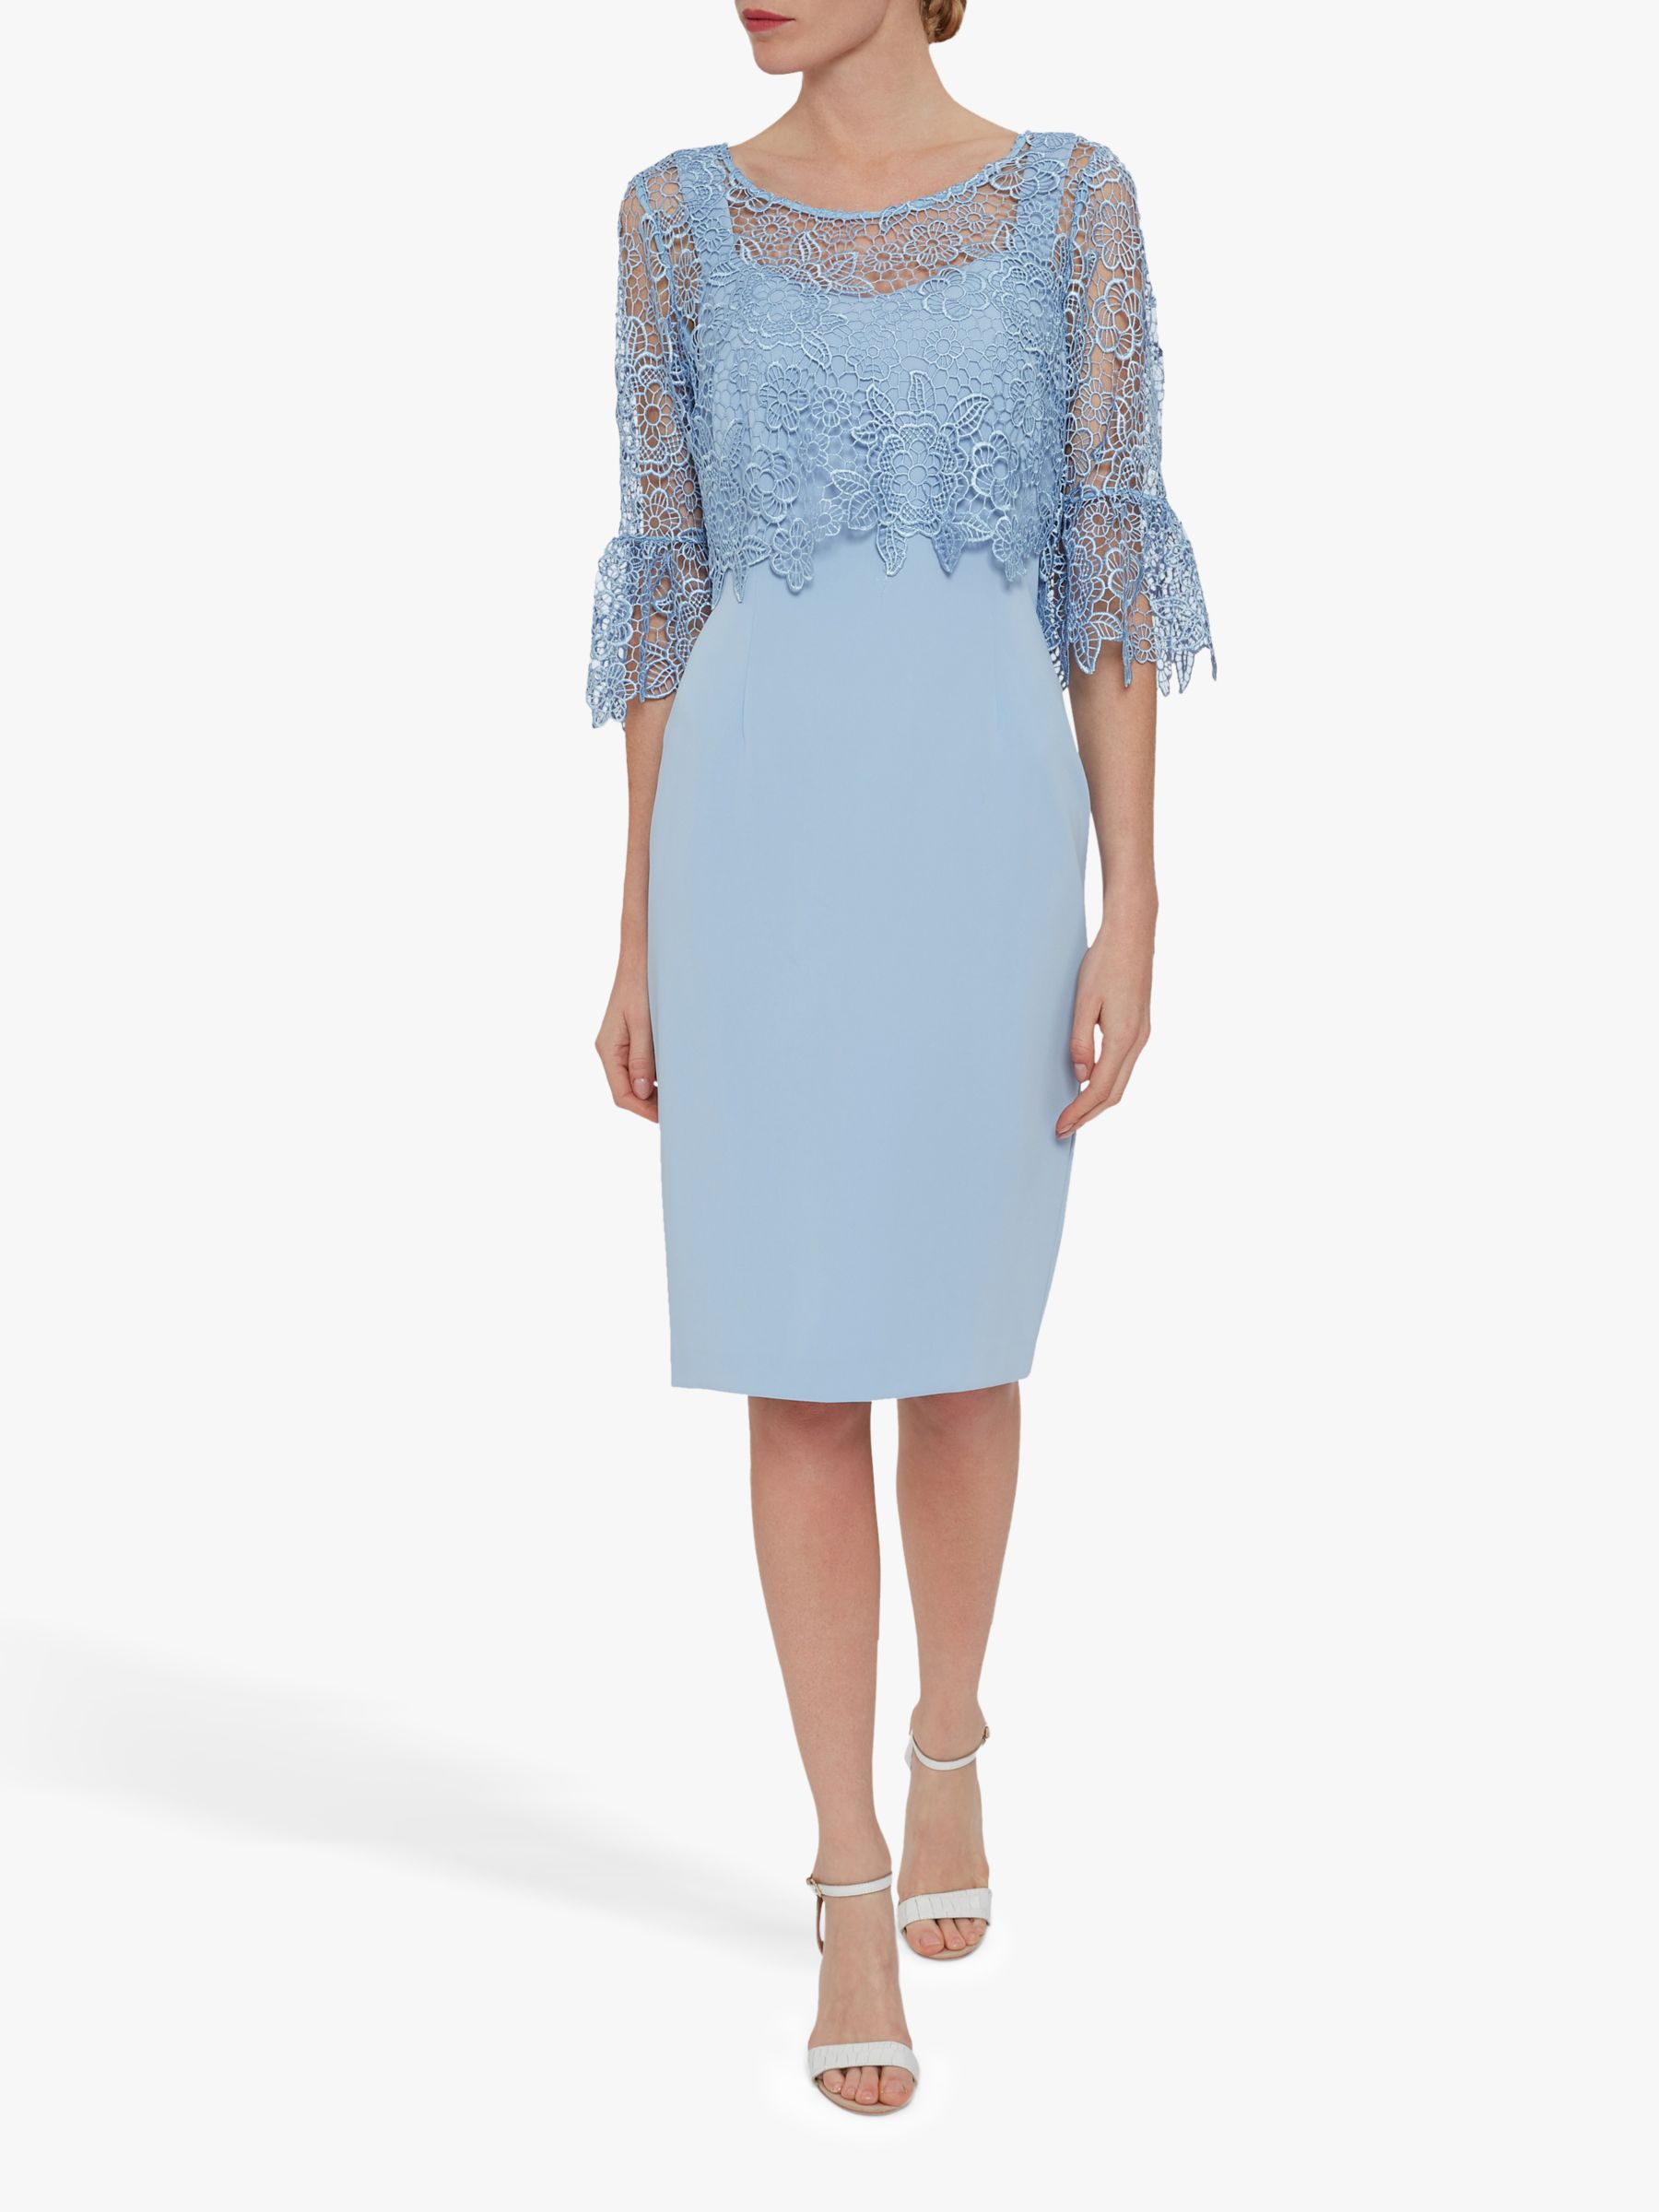 Gina Bacconi Amy Lace Overtop Dress, Nordic Blue at John Lewis & Partners